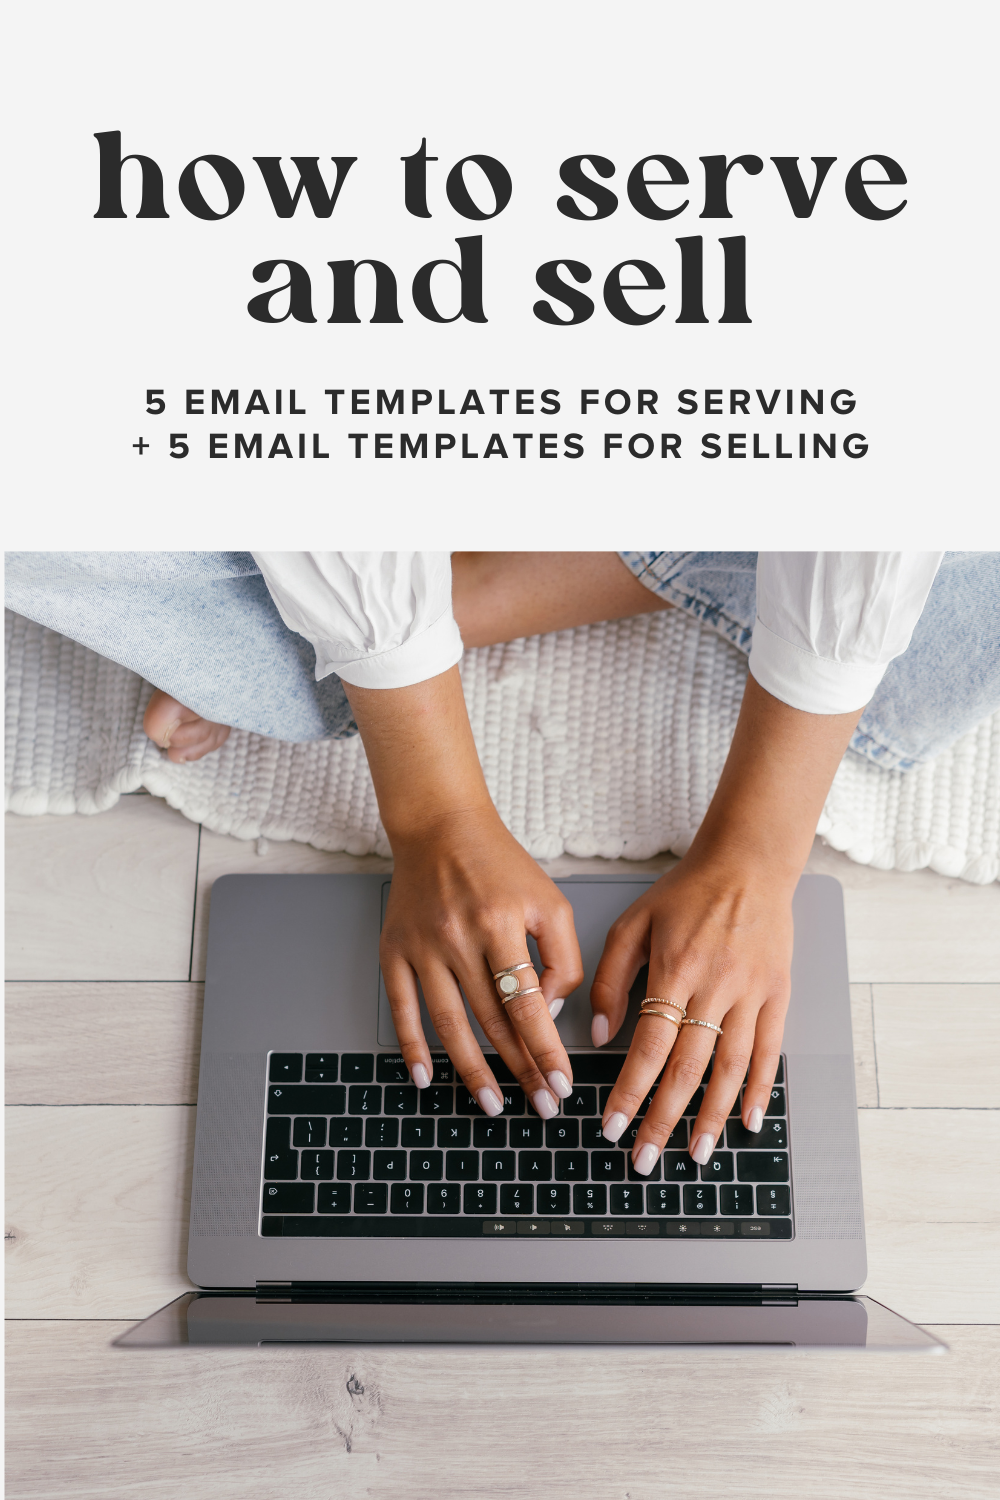 10 email templates ready to go for you